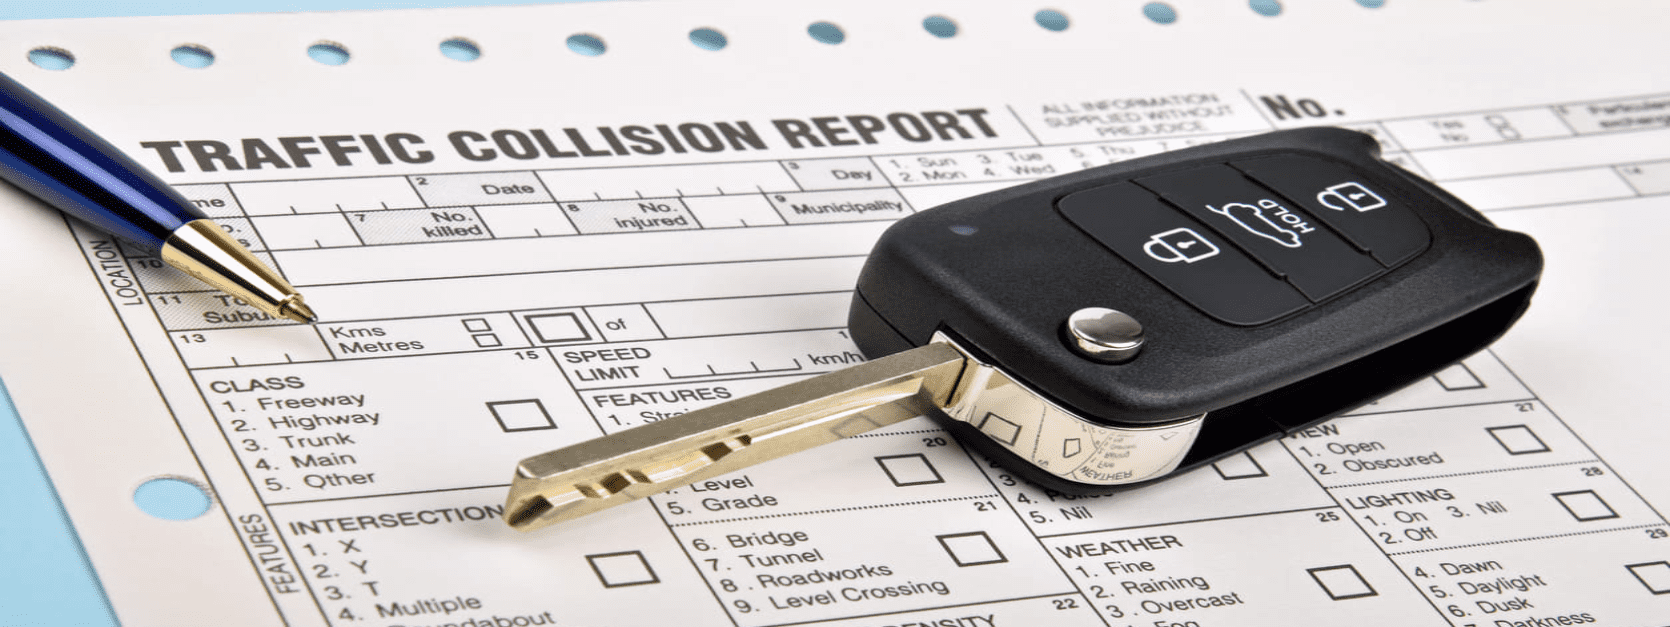 Details of a Car Accident Police Report